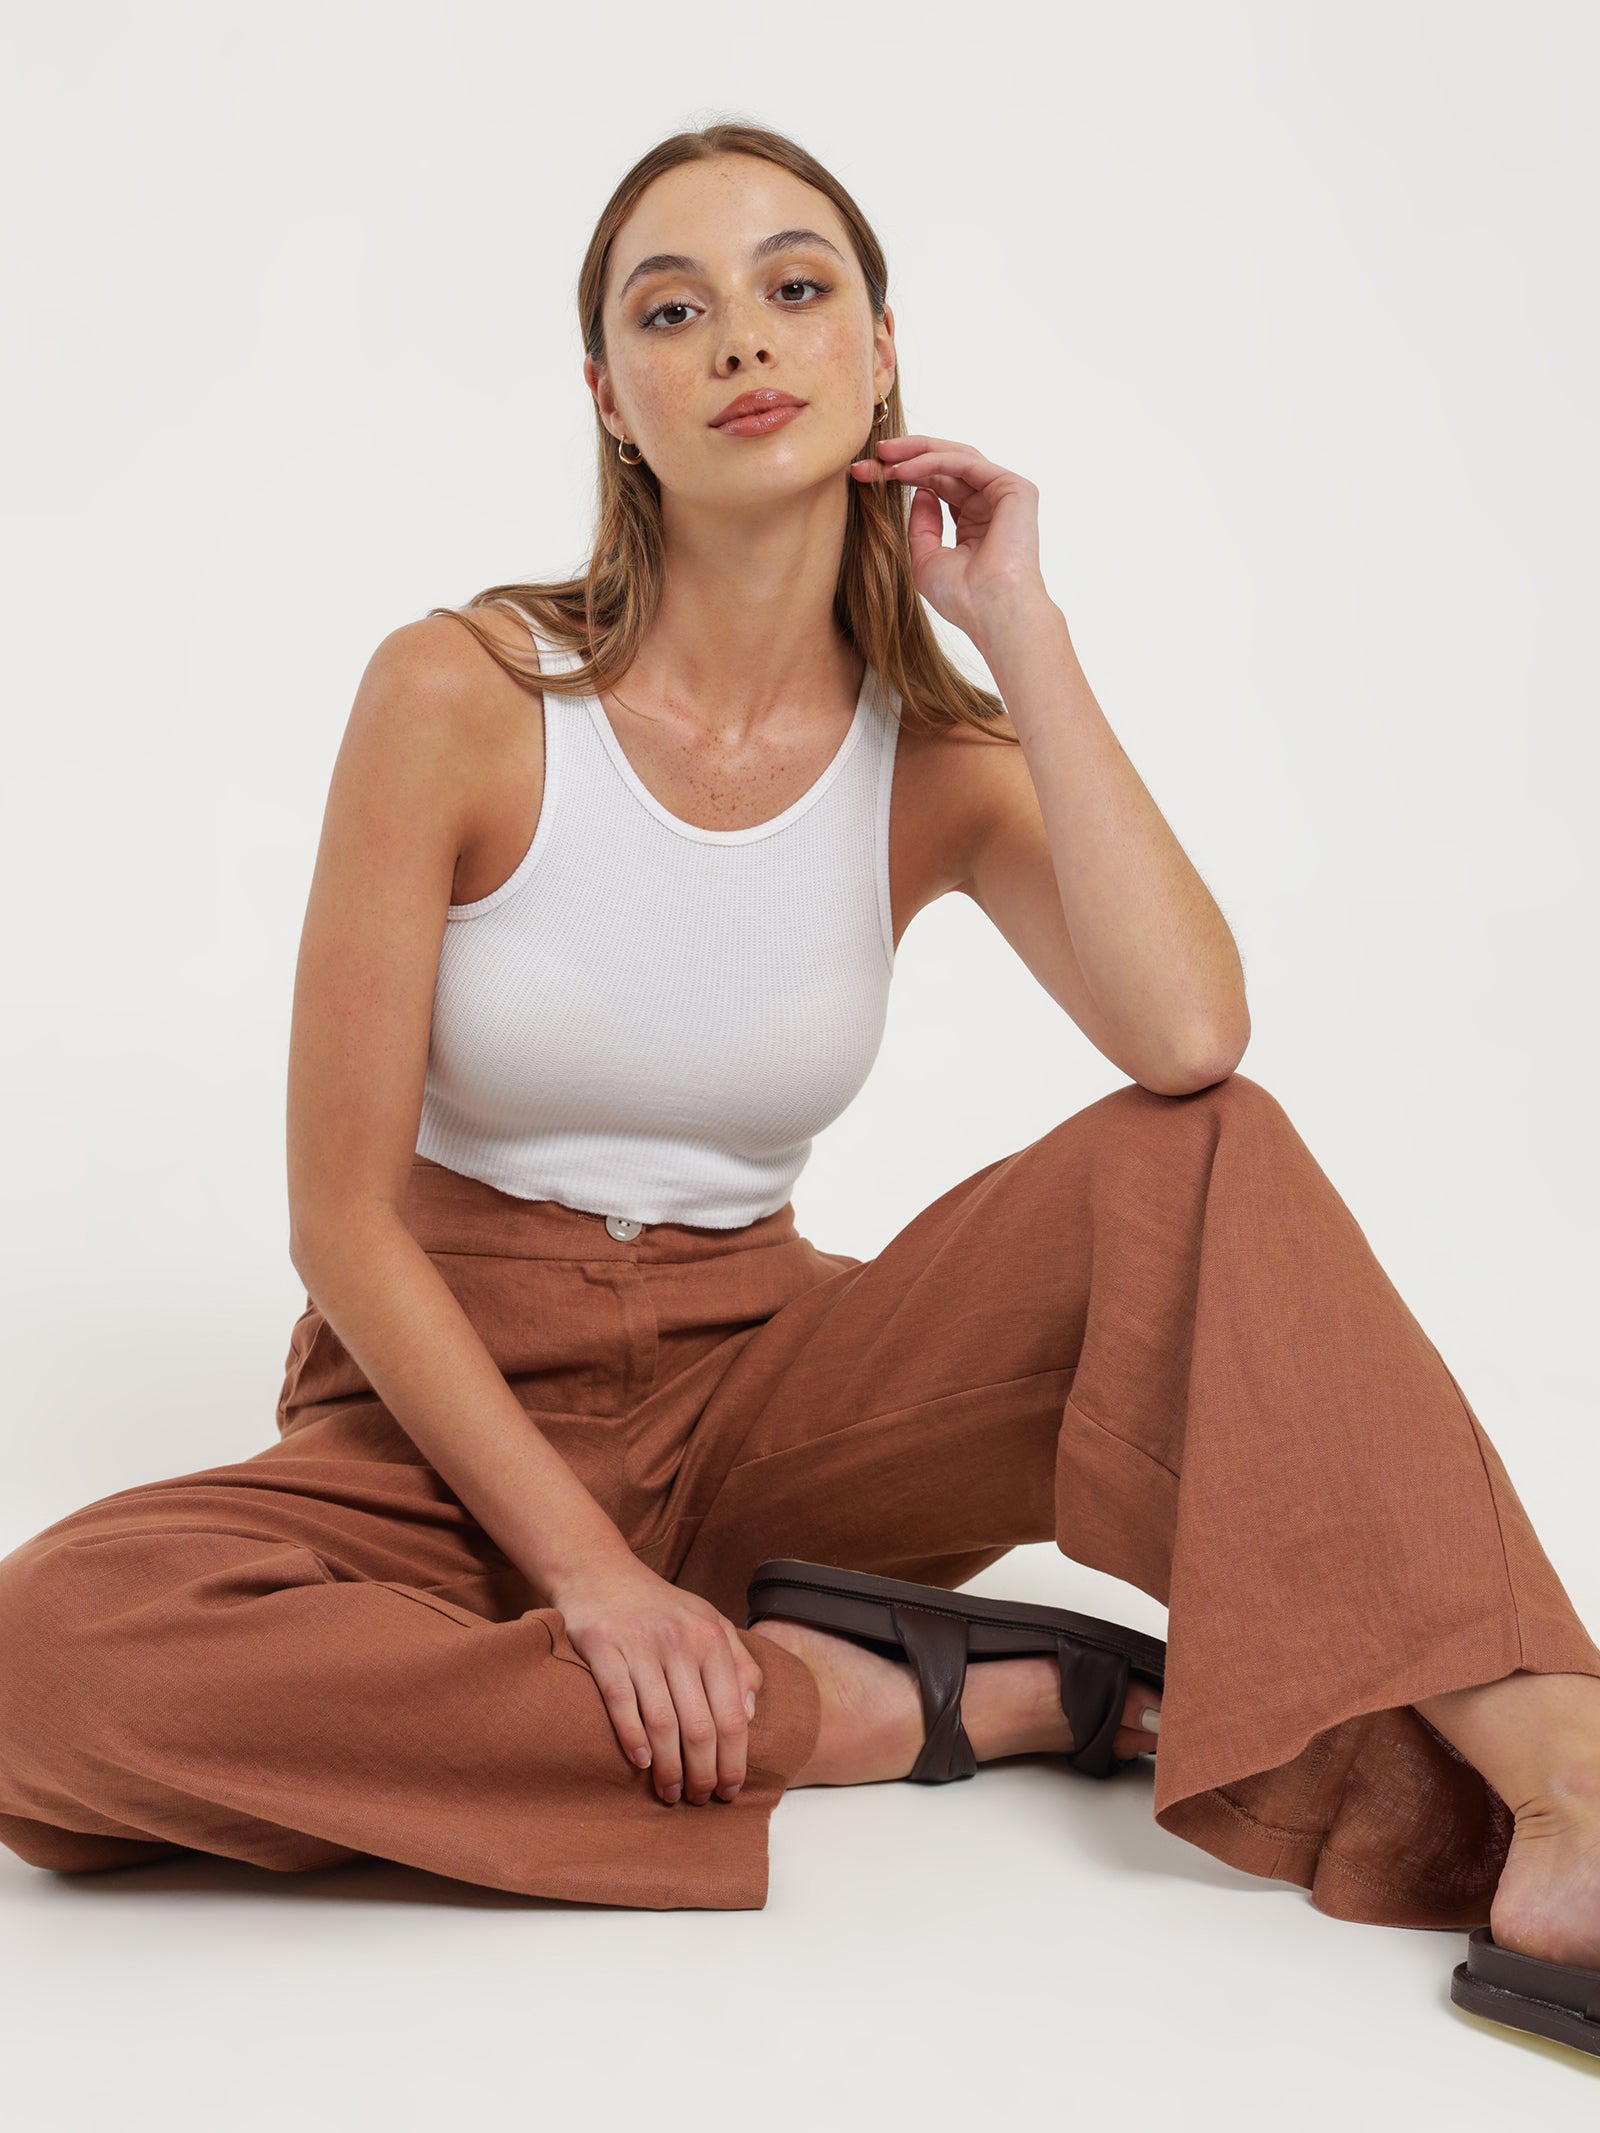 Terracotta palazzo trousers with pockets Size 0, 2, 4, 6, 8 US Fashionable  NEW | eBay